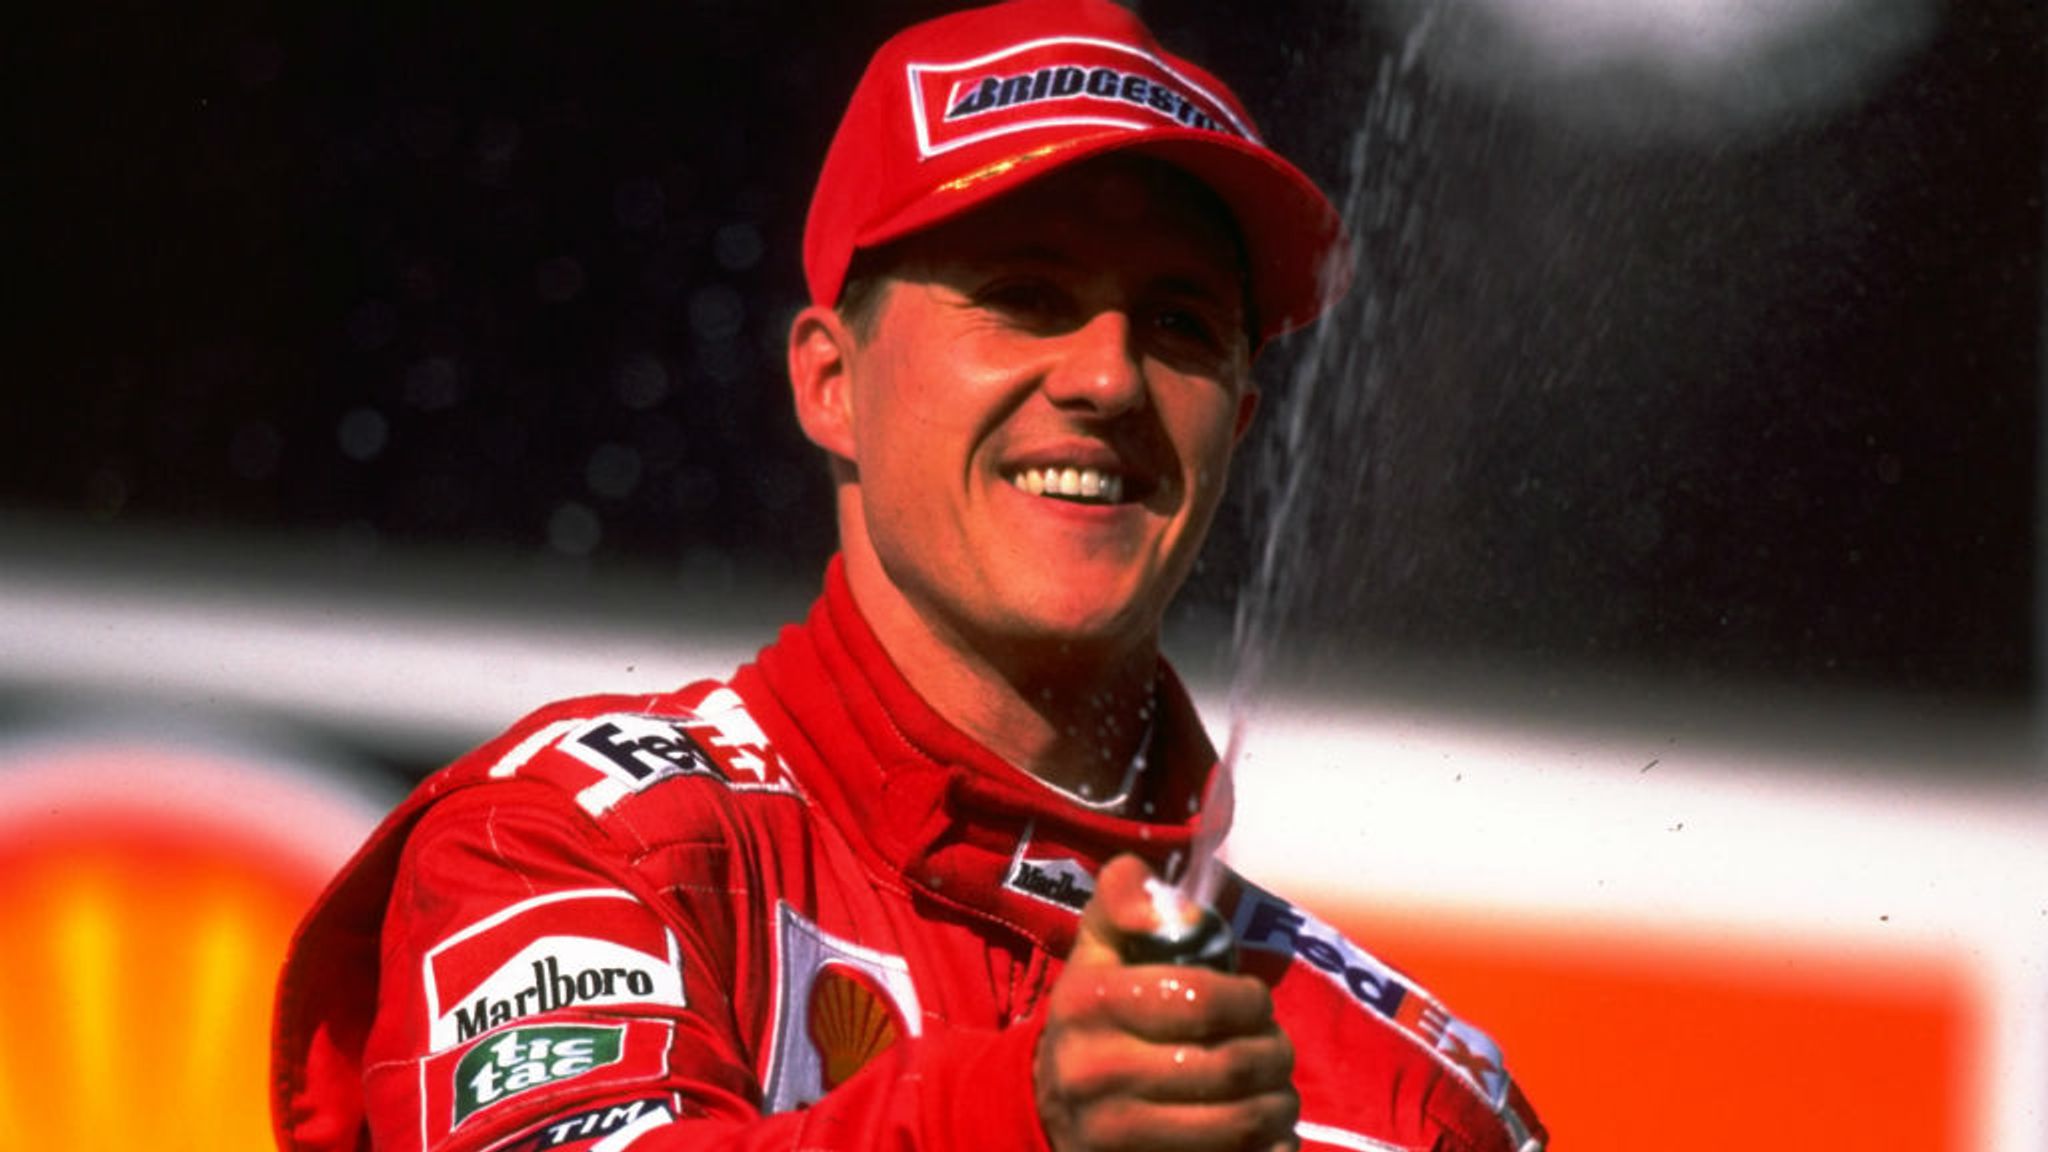 Michael Schumacher Health Updates How is the F1 Champion Recovering after the 2013 Injury